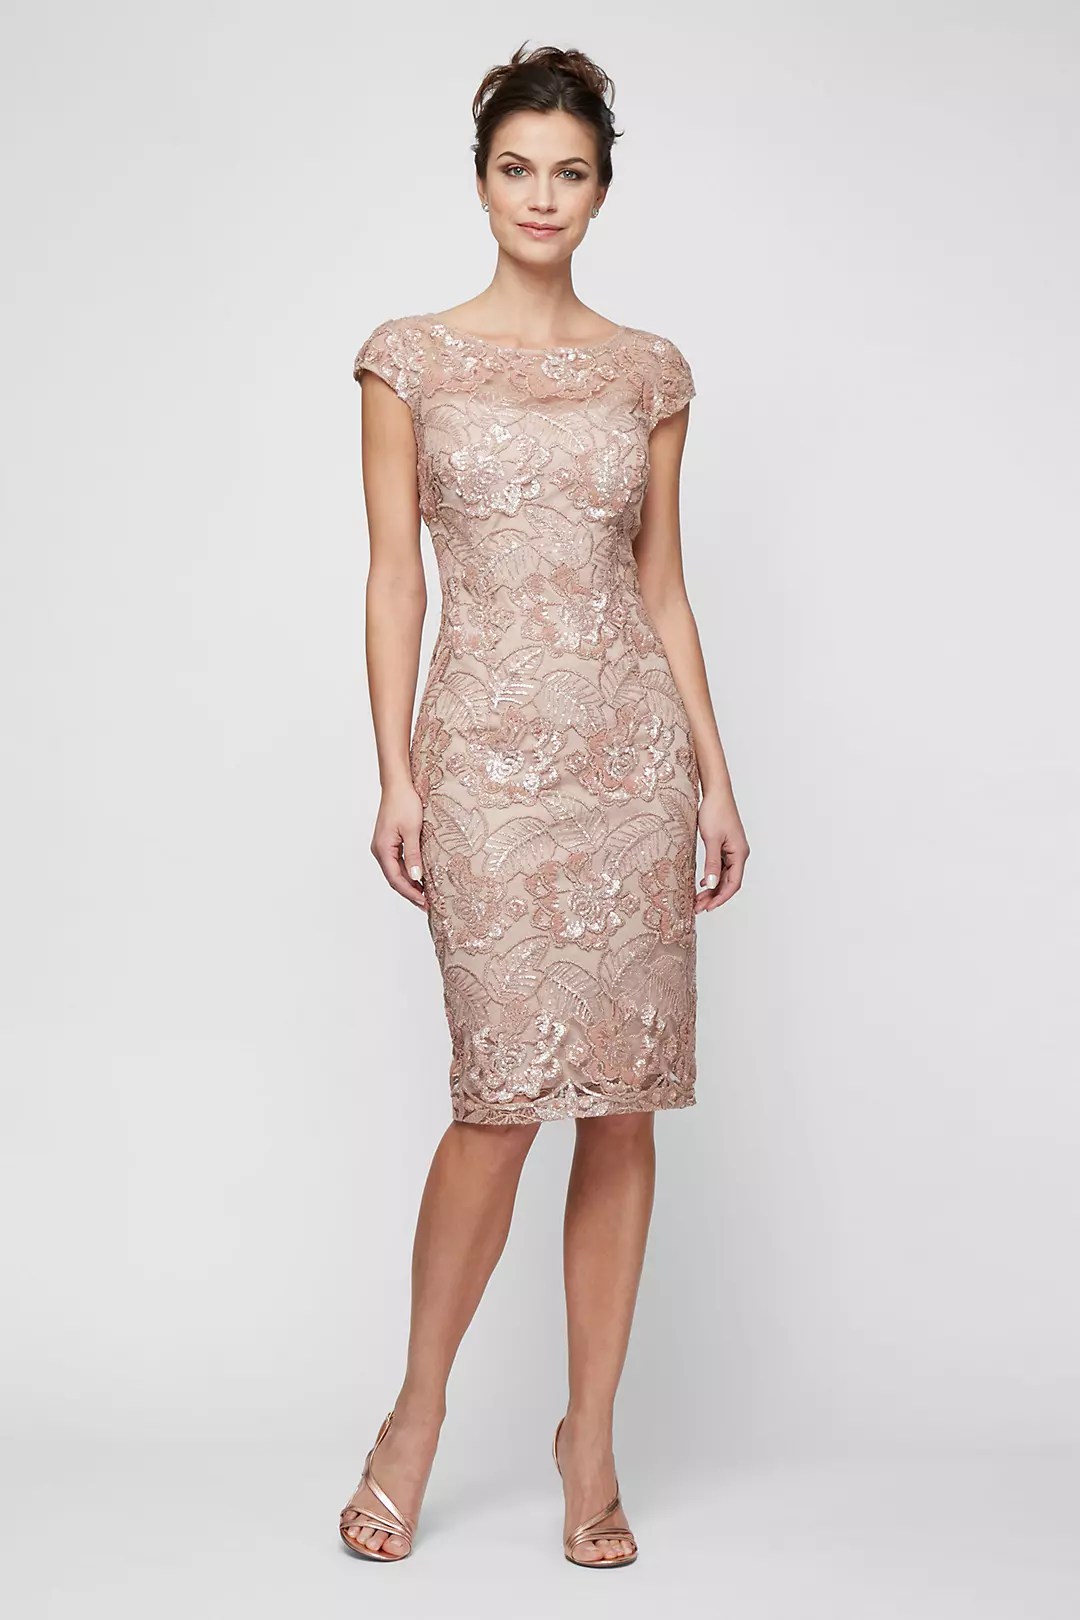 Petite Sequin Lace Sheath with Cap Sleeves Image